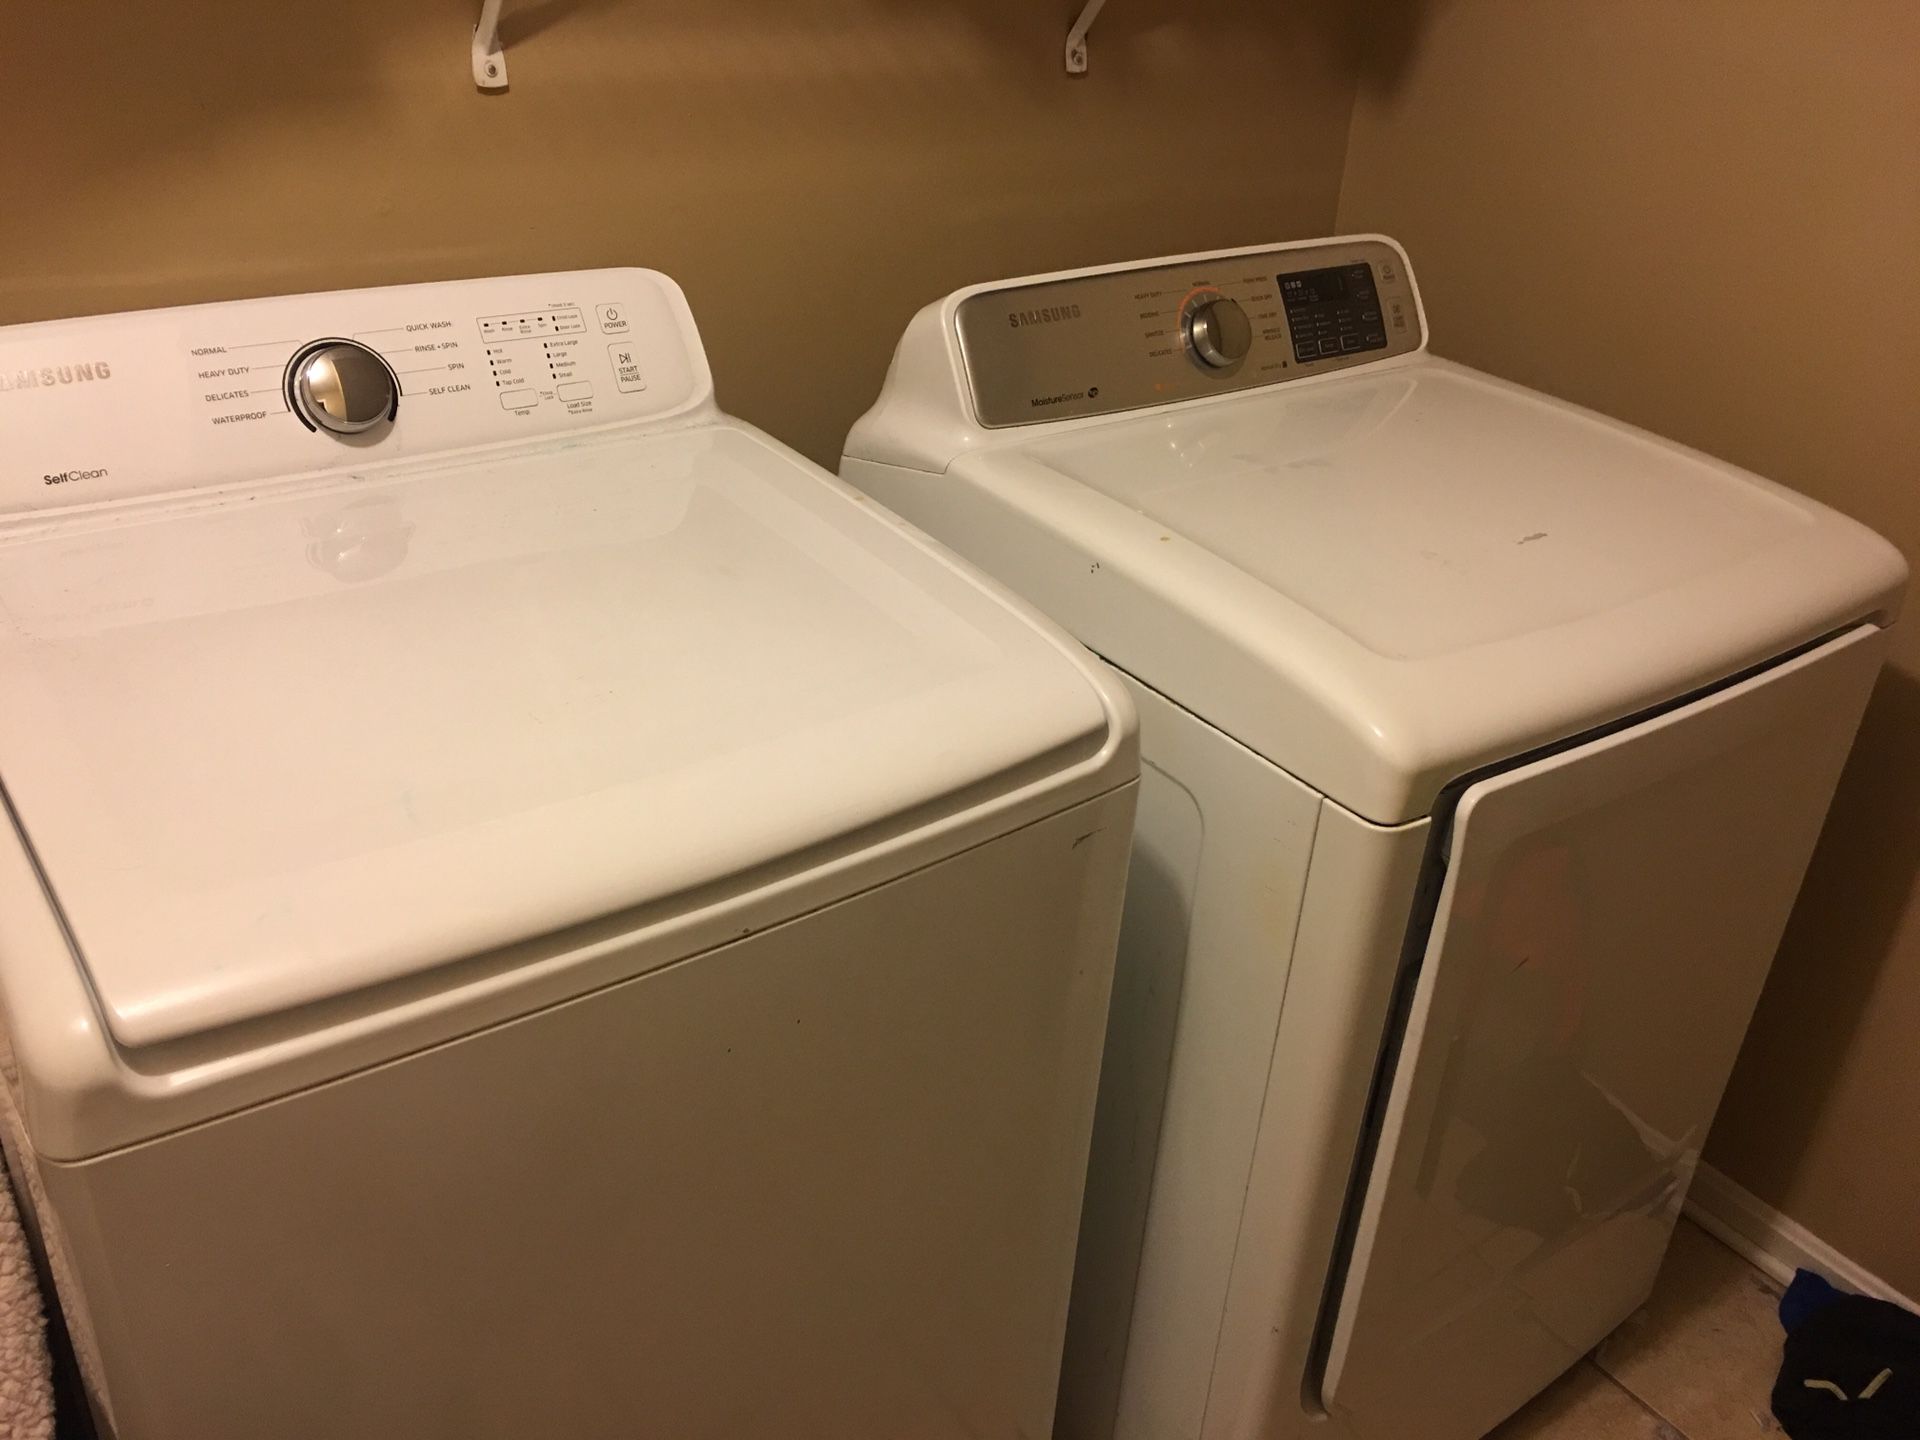 Samsung digital washer and dryer only one year old